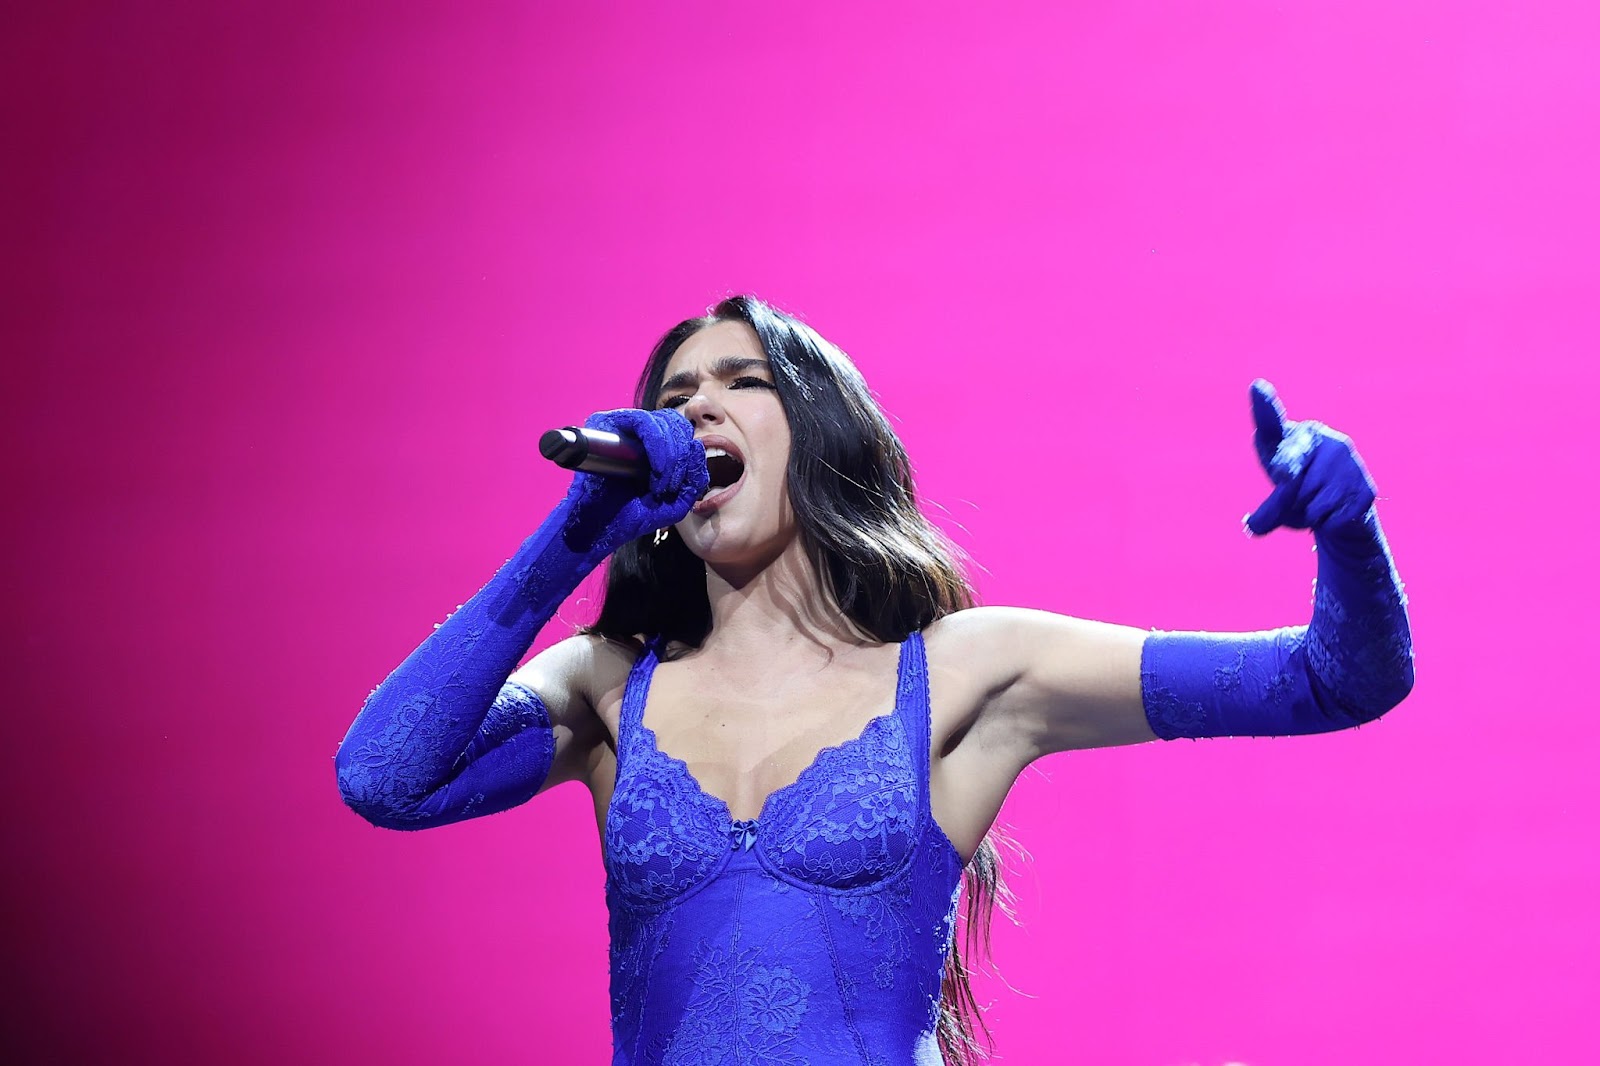 Dua Lipa performs live onstage during her 'Future Nostalgia Tour' at Spark Arena in Auckland, New Zealand.